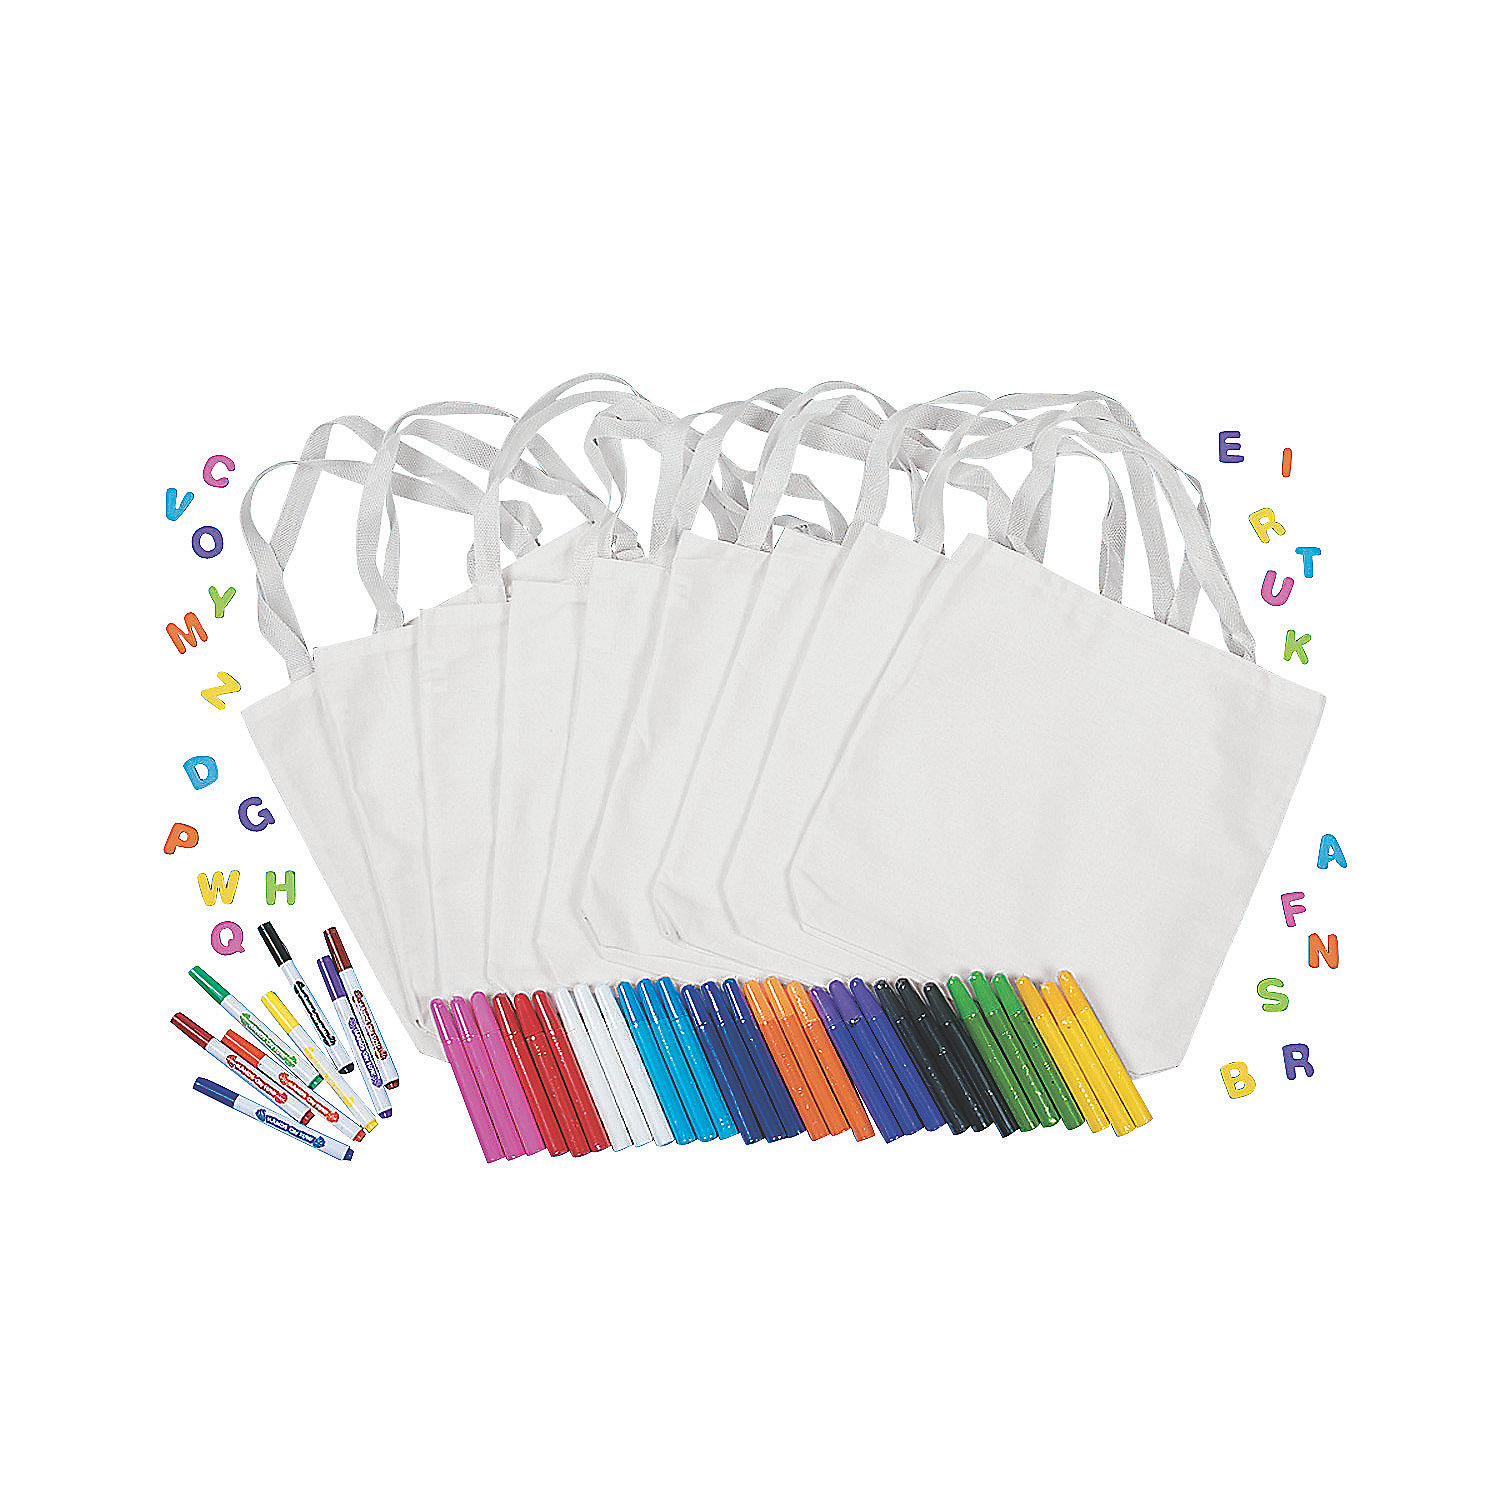 ... tote bag kit in 56 90060 do it yourself white canvas tote bag kit what